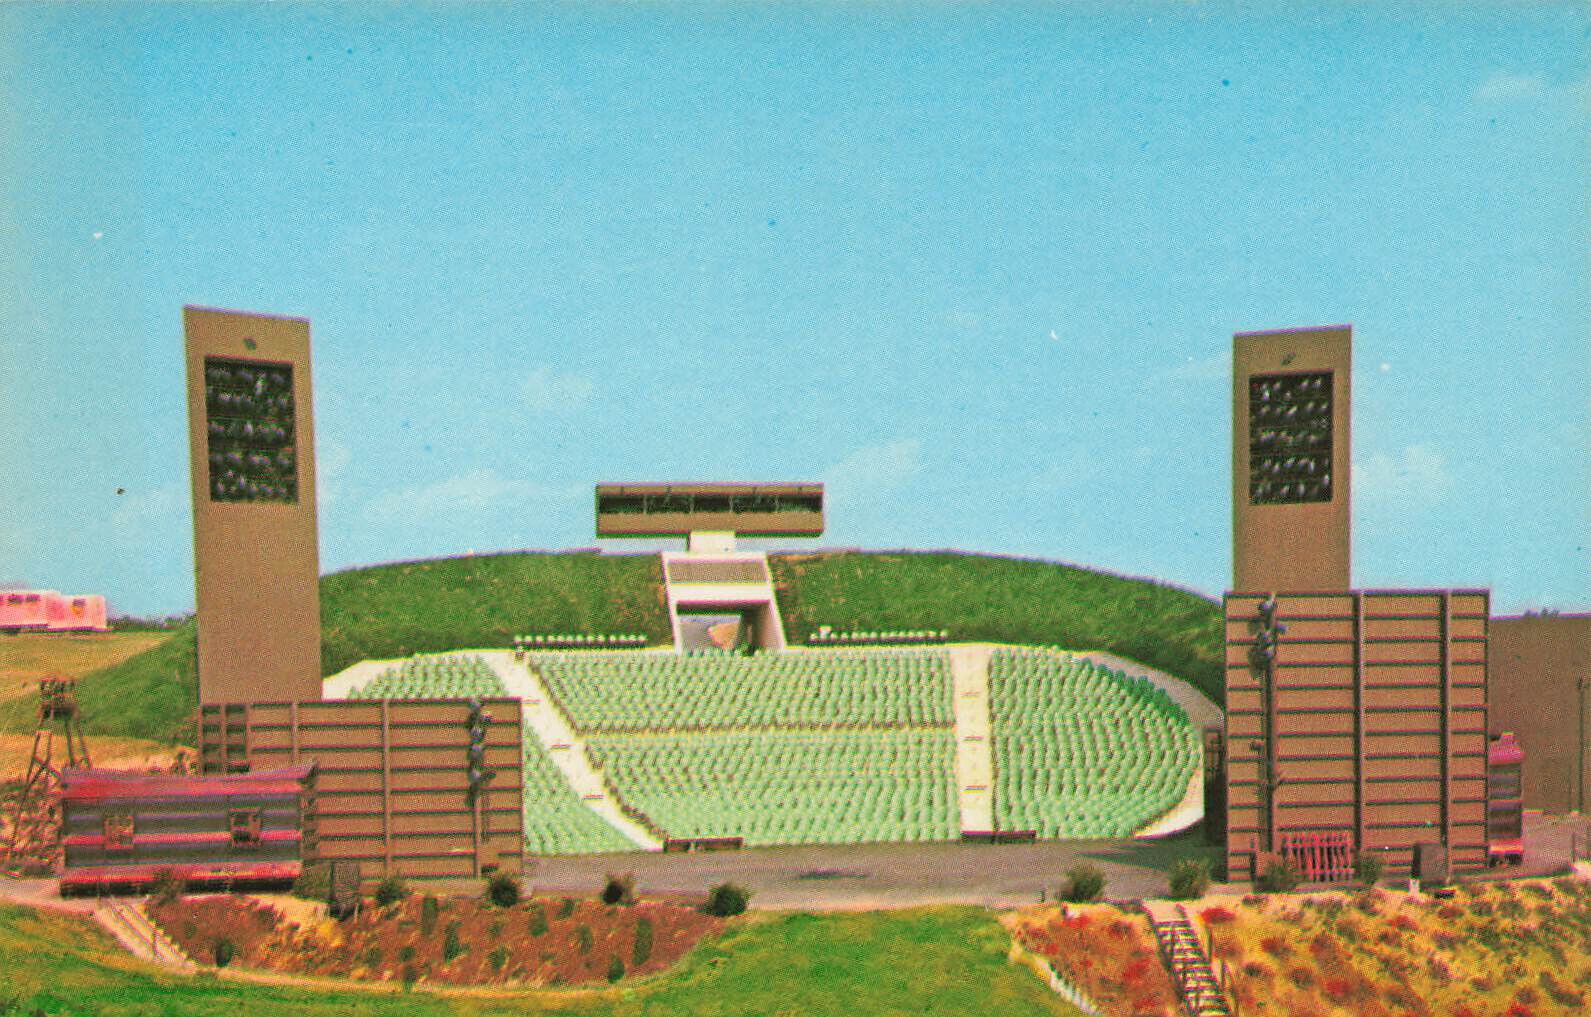 Dover Ohio Postcard Amphitheater Trumpet In The Land Advertising Vintage Tourism